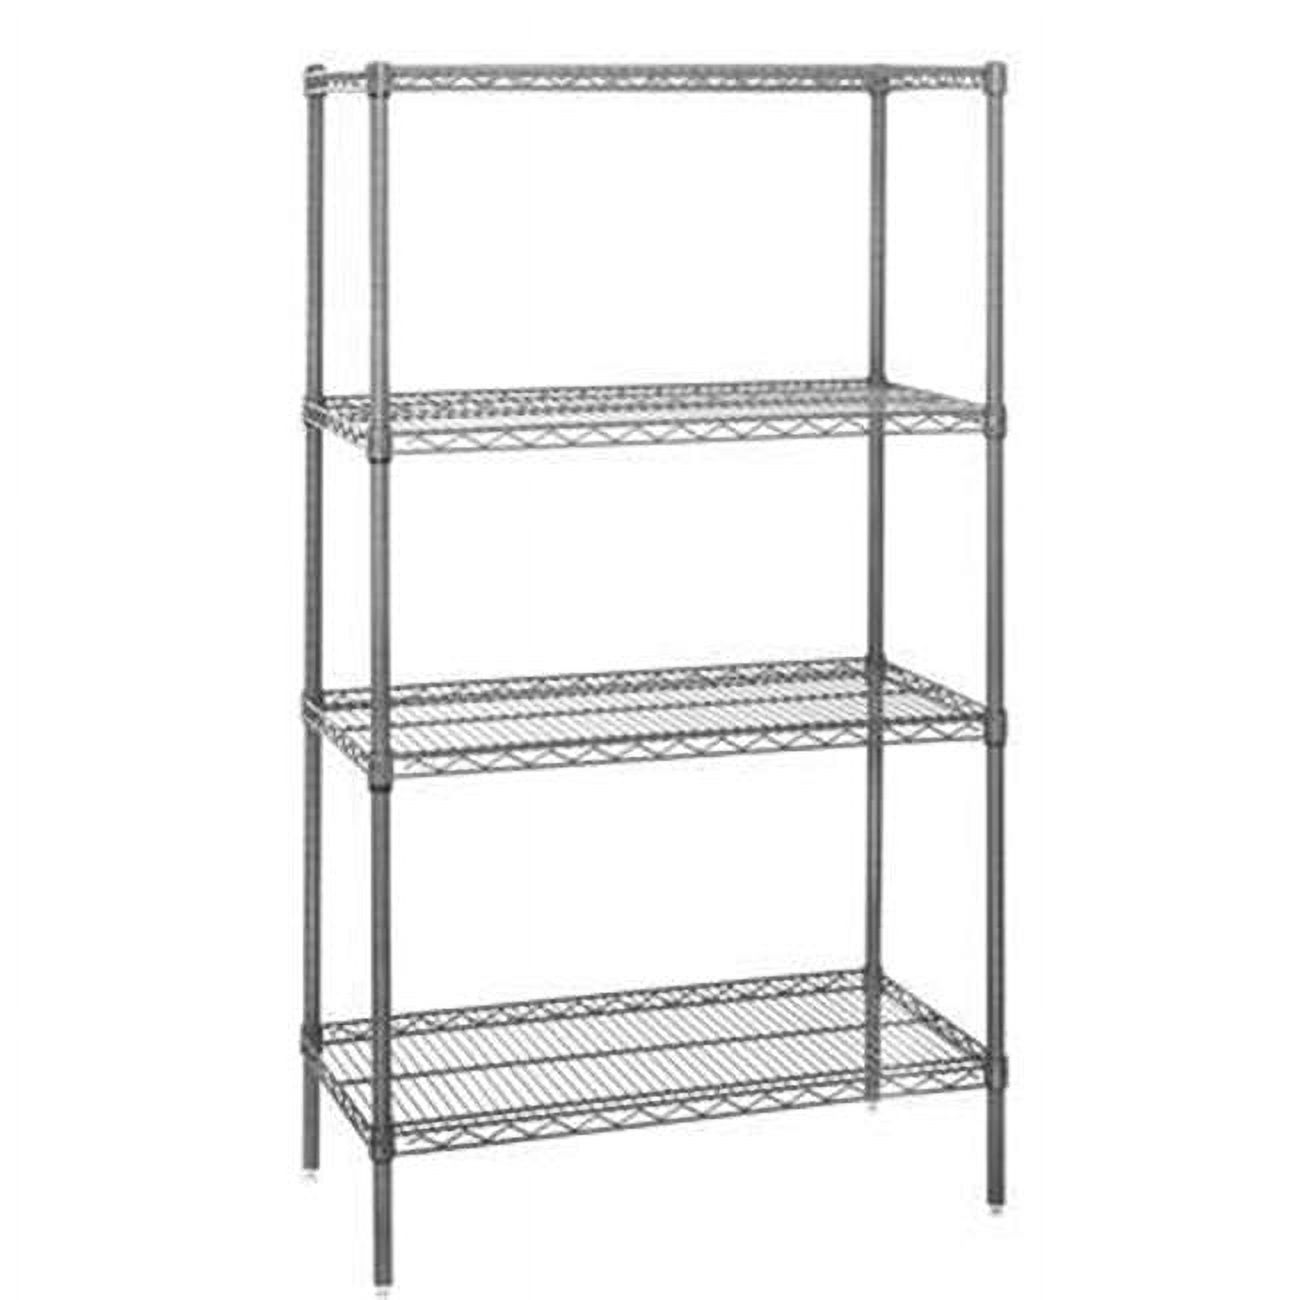 CleanItSupply Wire Shelving Add-On Unit, 4 Shelf, 60" x 18" x 54", Chrome, 1/EA (WS601854) - image 1 of 1